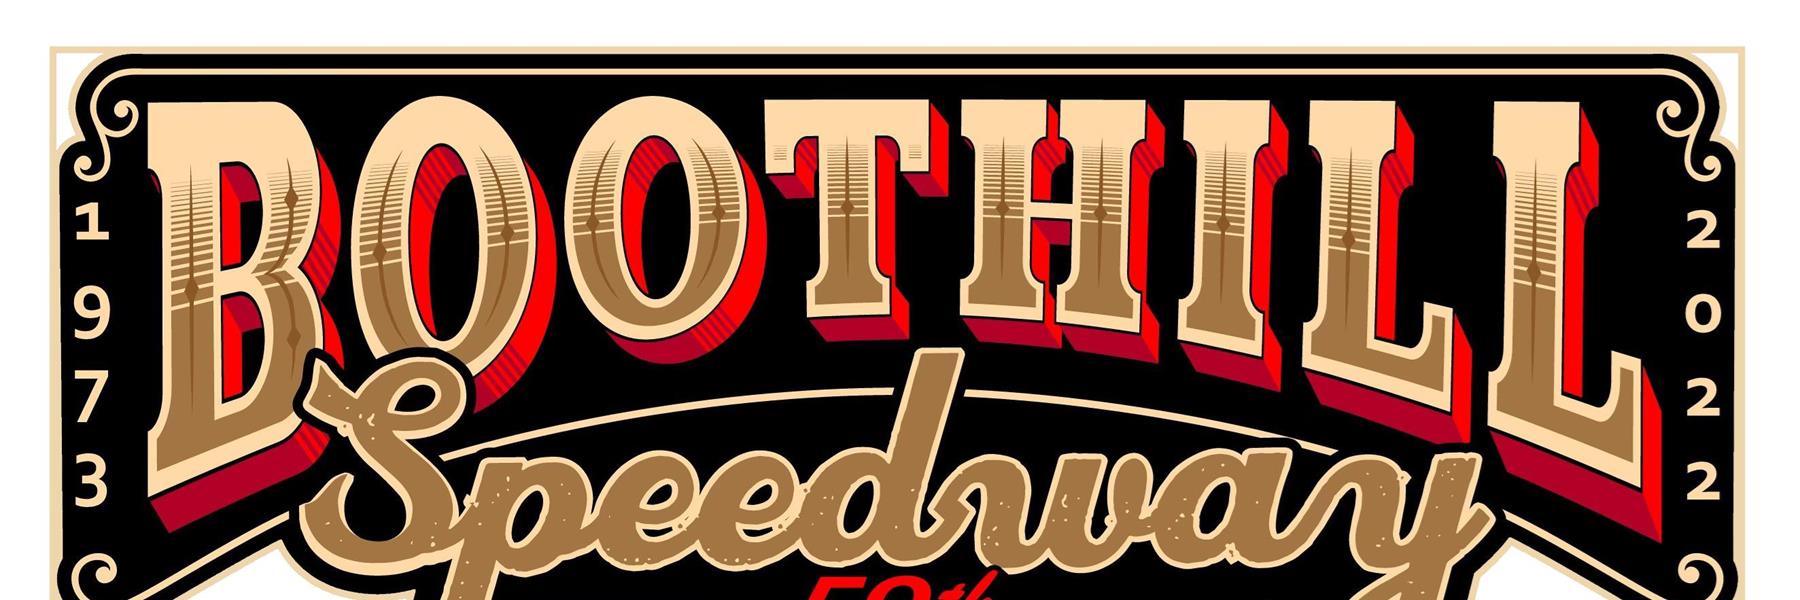 5/5/2023 - Boothill Speedway